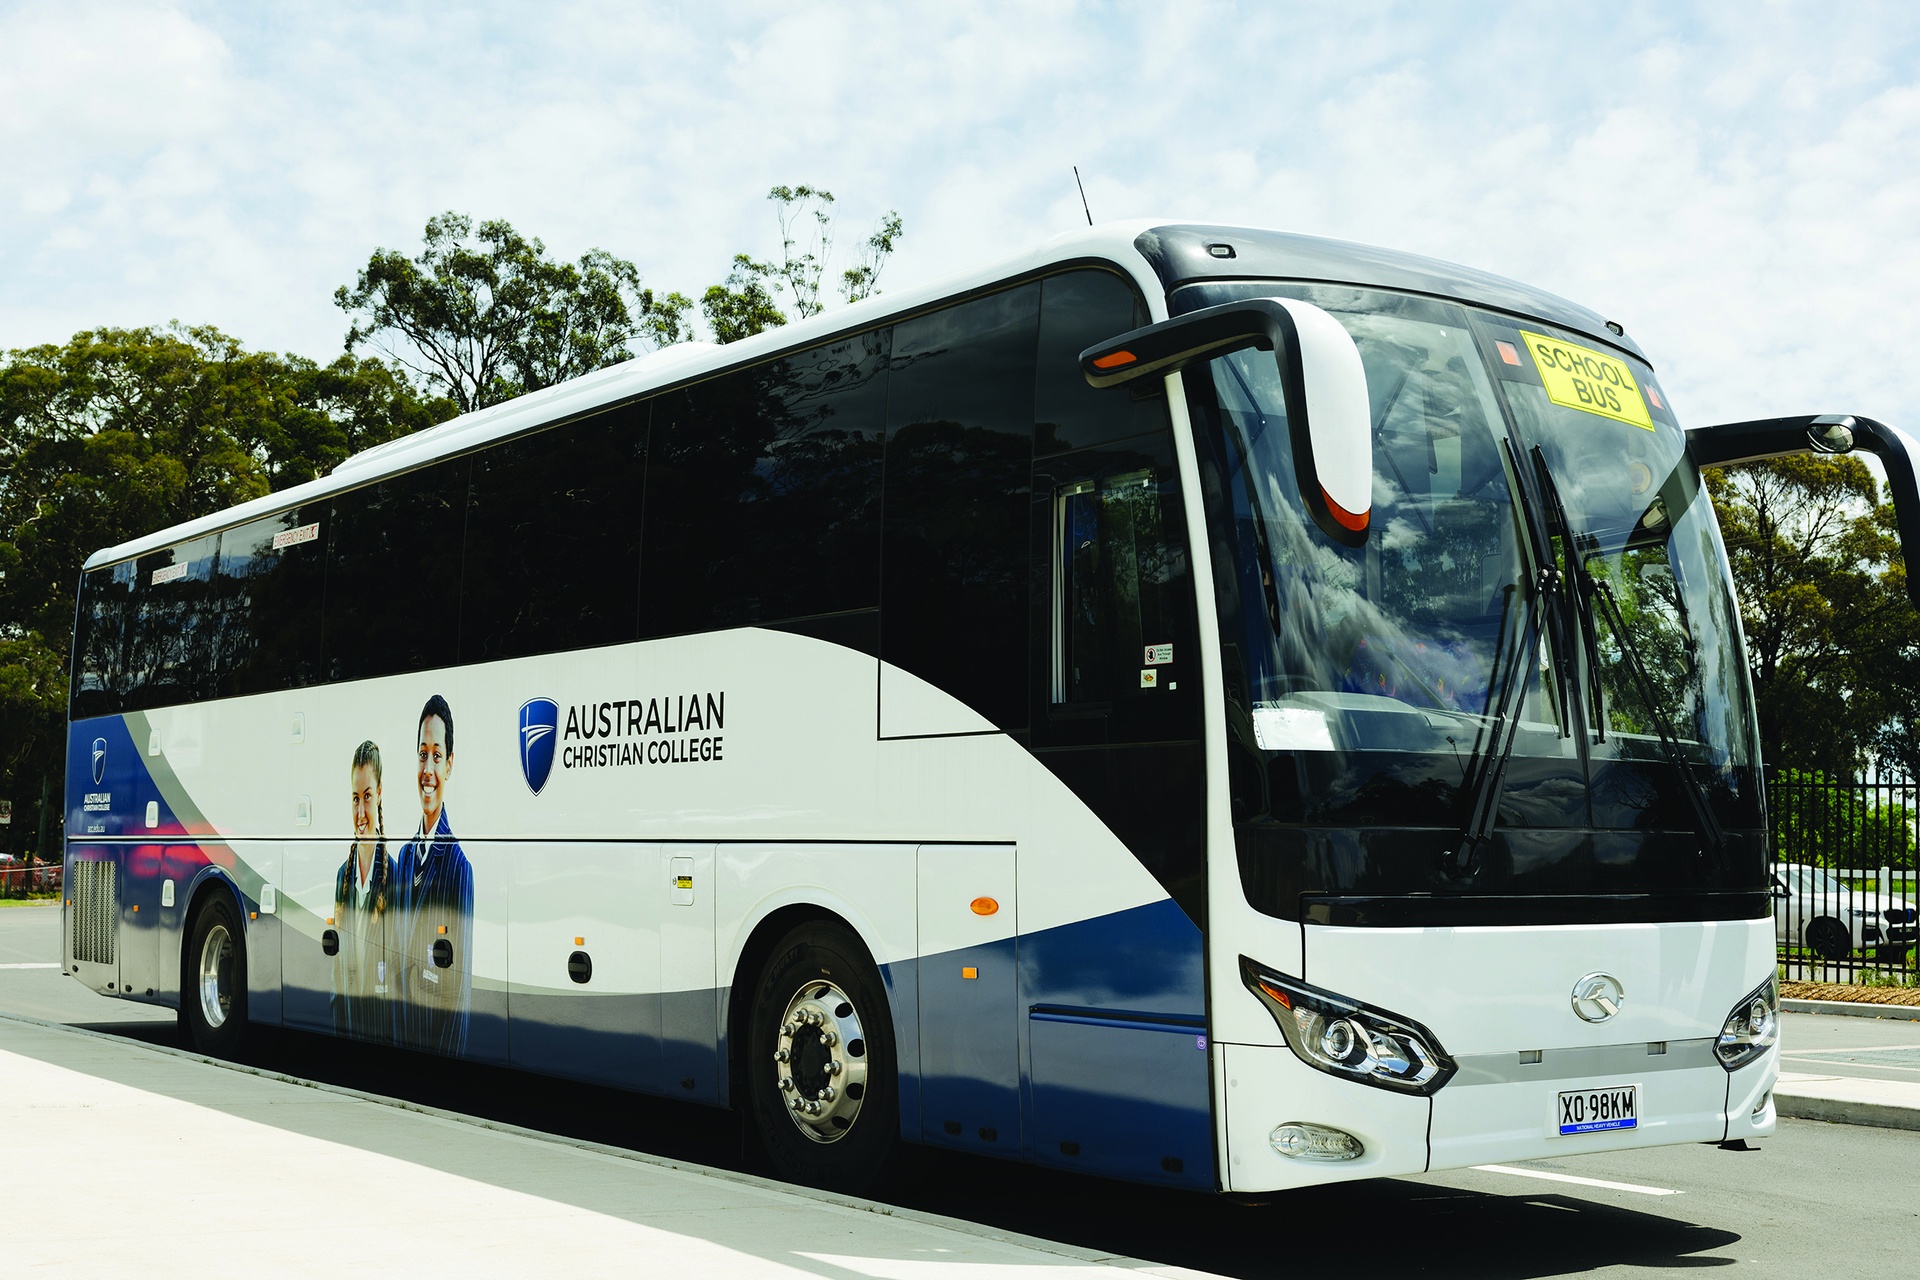 ACC Burnie private bus with decal of students on the side